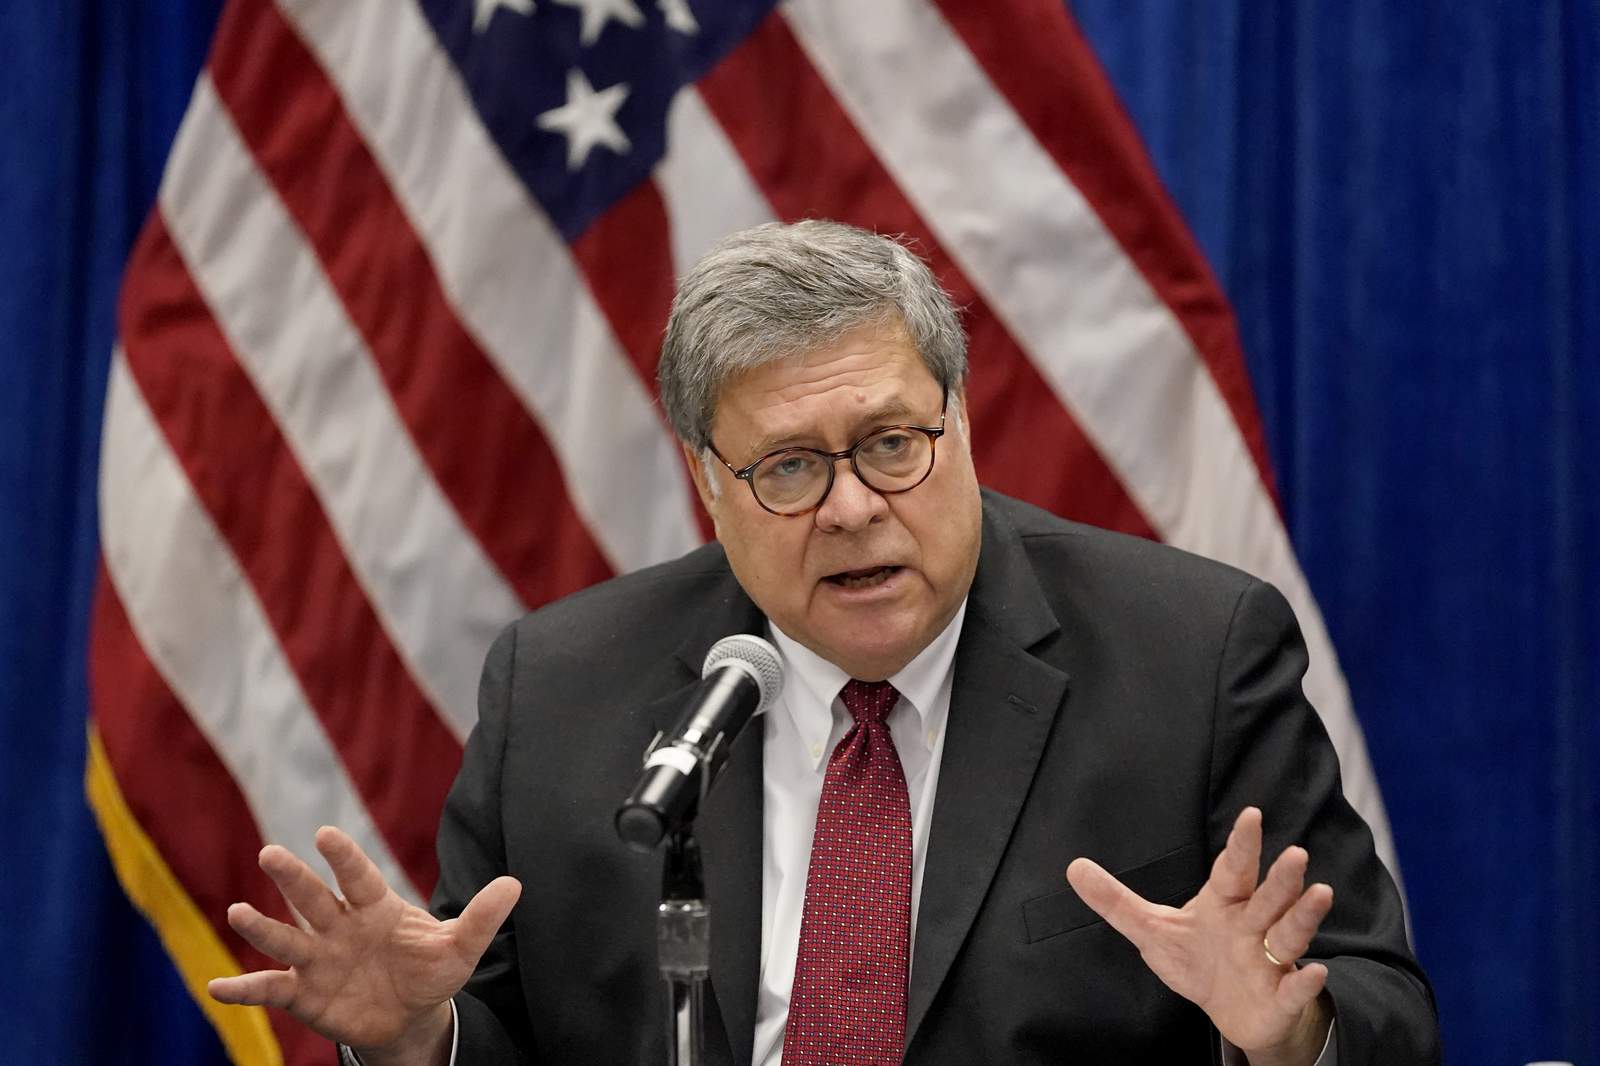 Trump says Barr resigning, will leave before Christmas